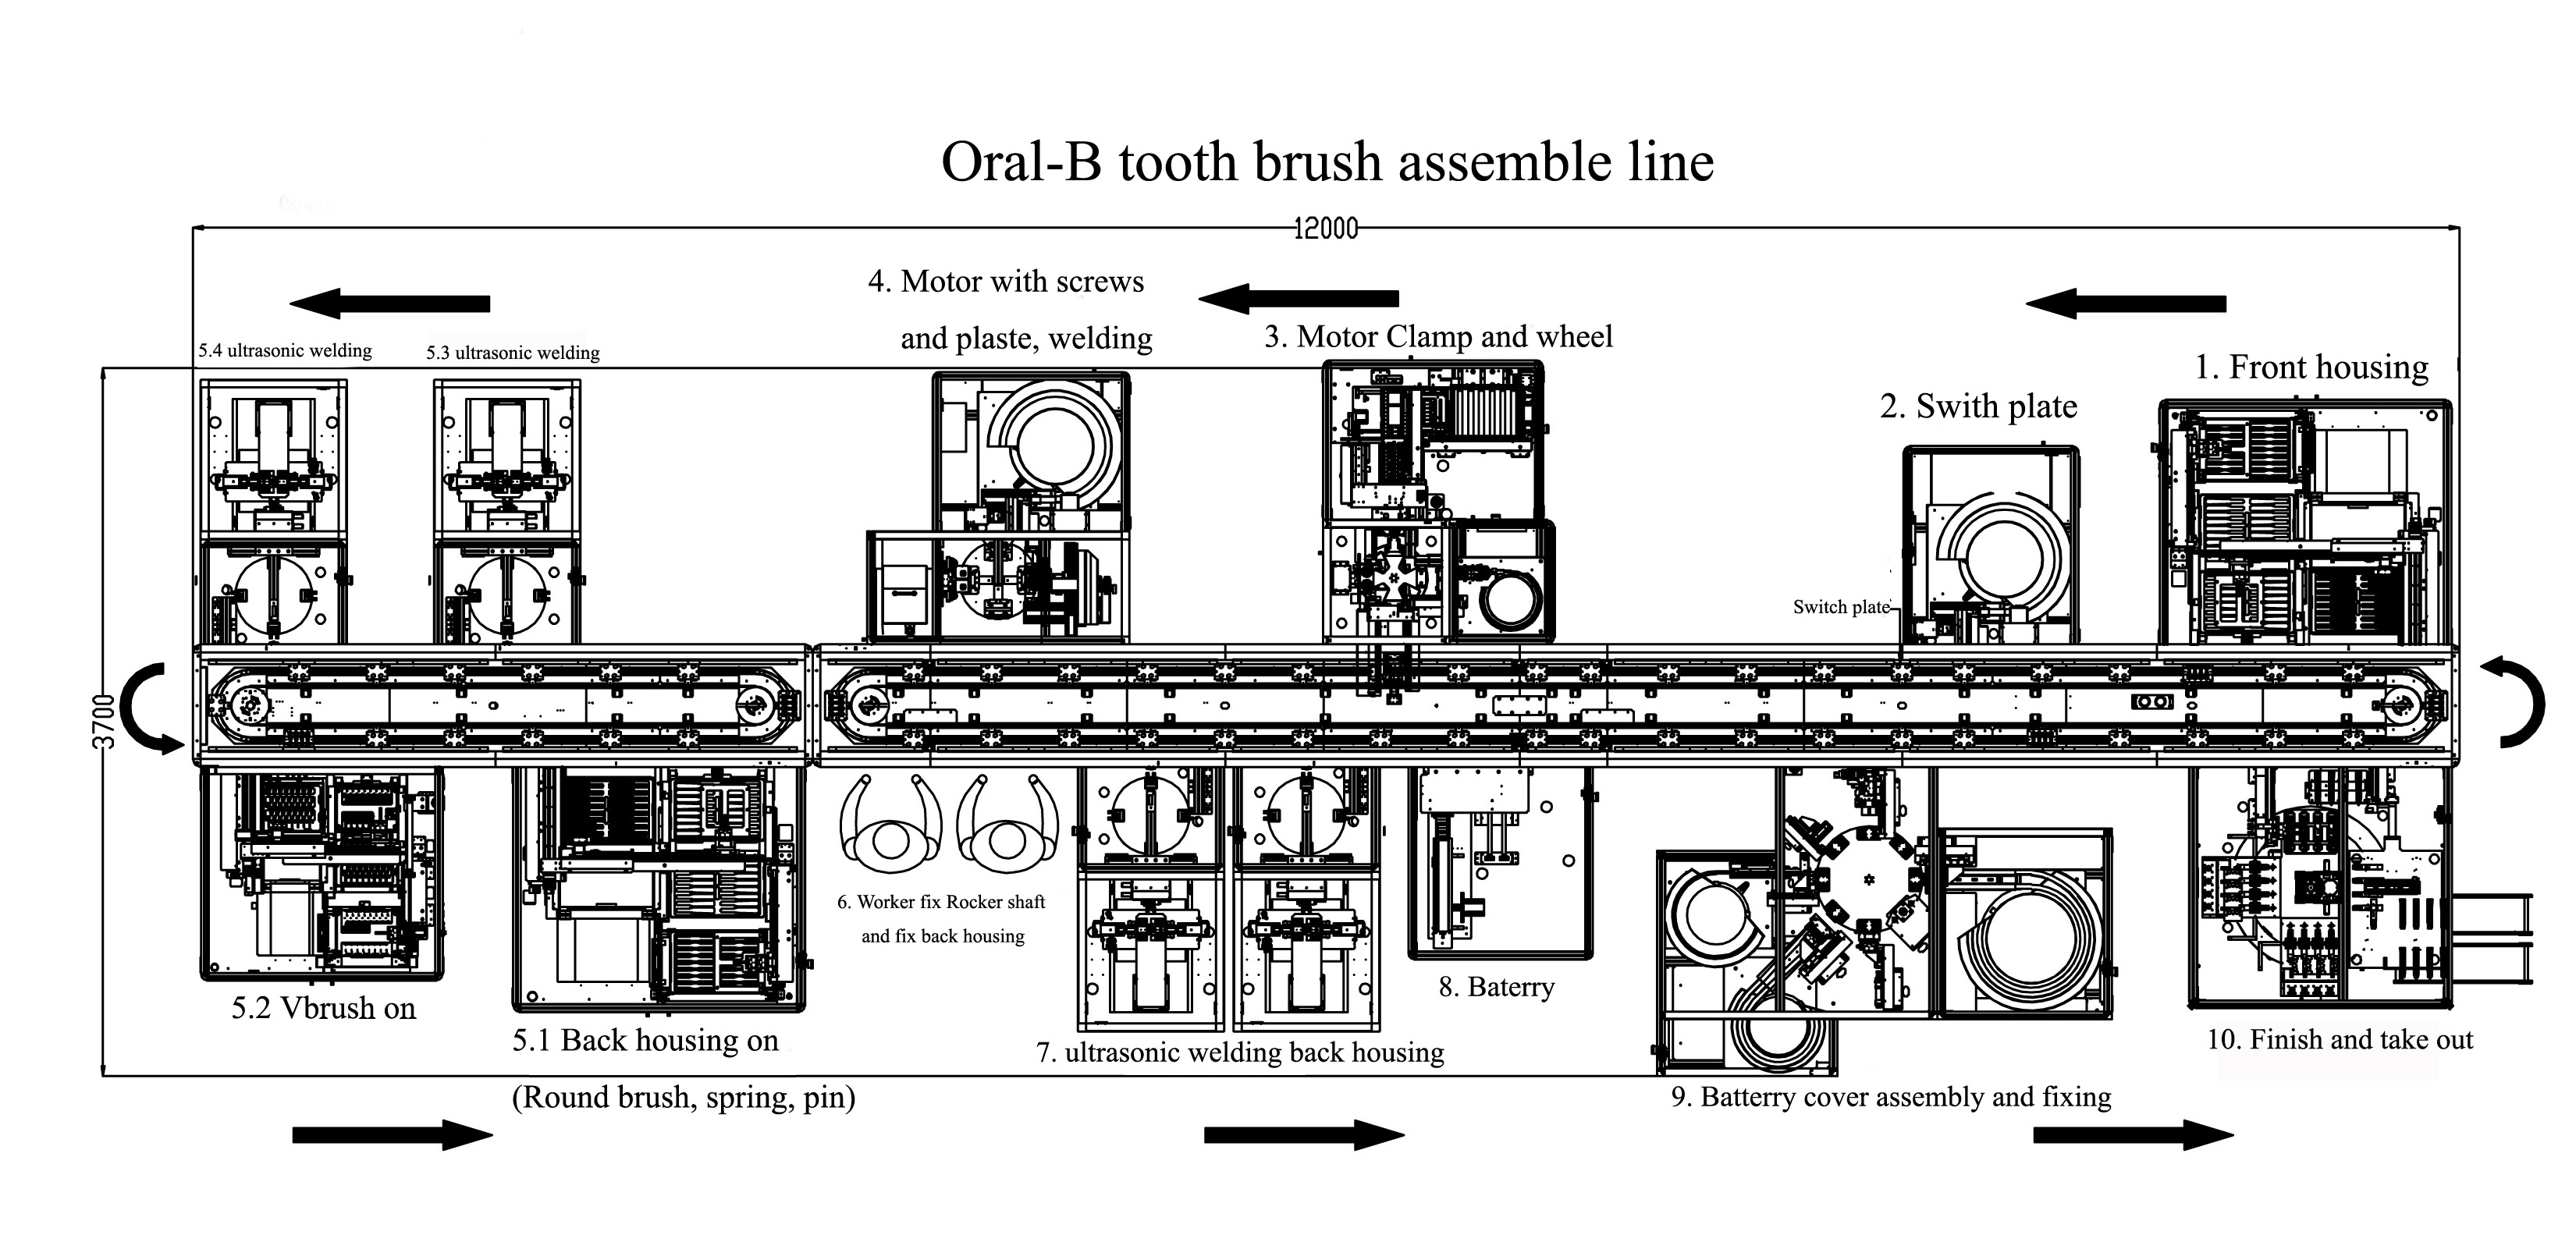 Assemble line for toothbrush 1